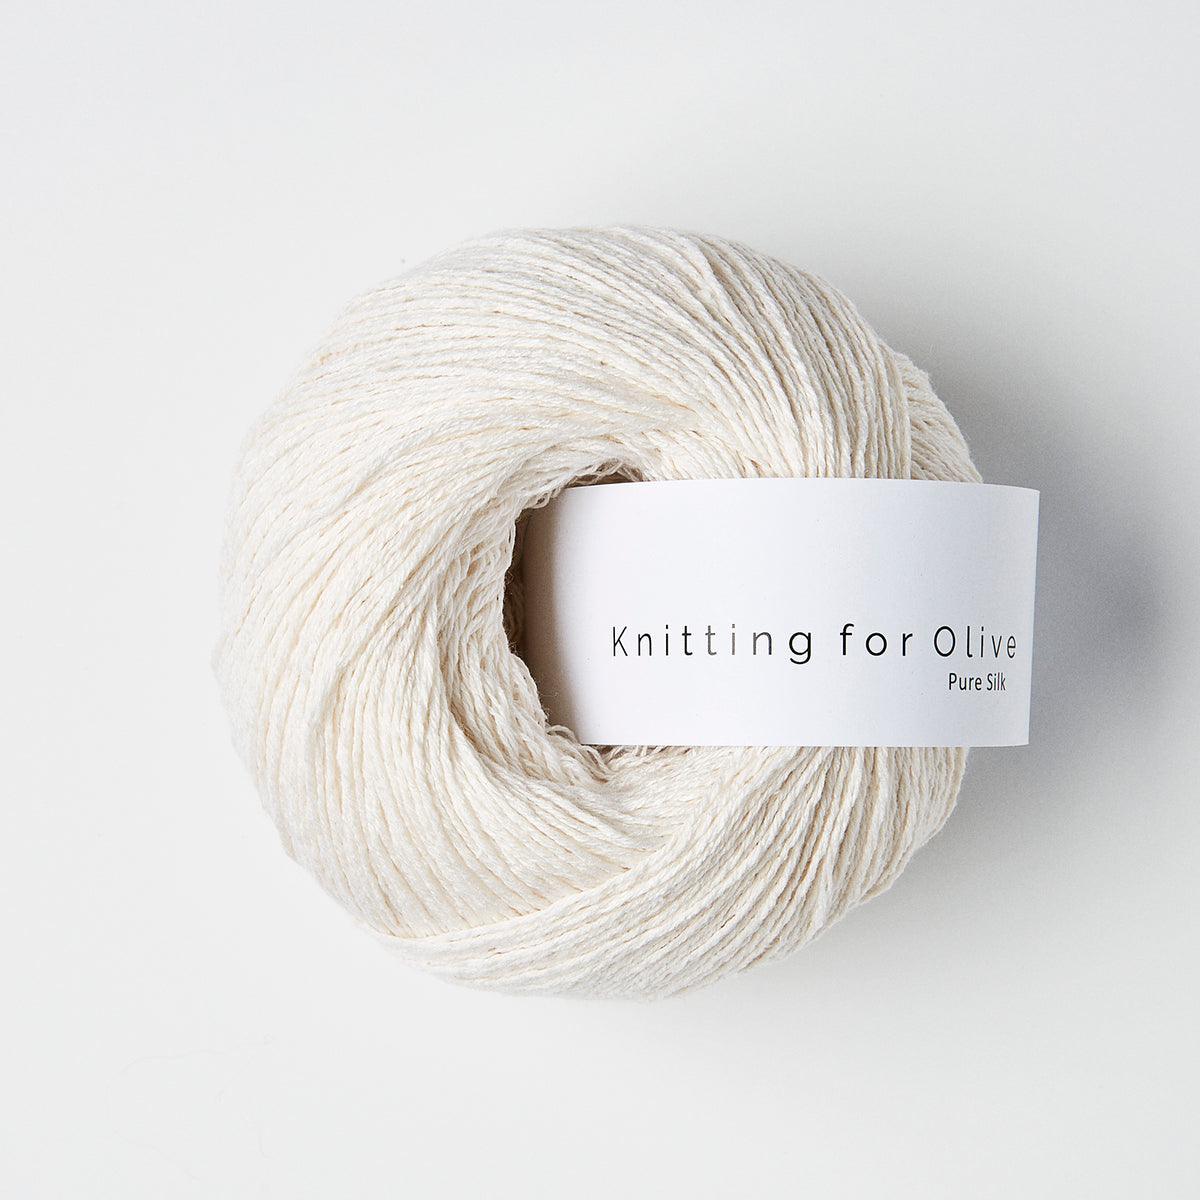 Knitting for Olive Pure Silk – Circle of Stitches